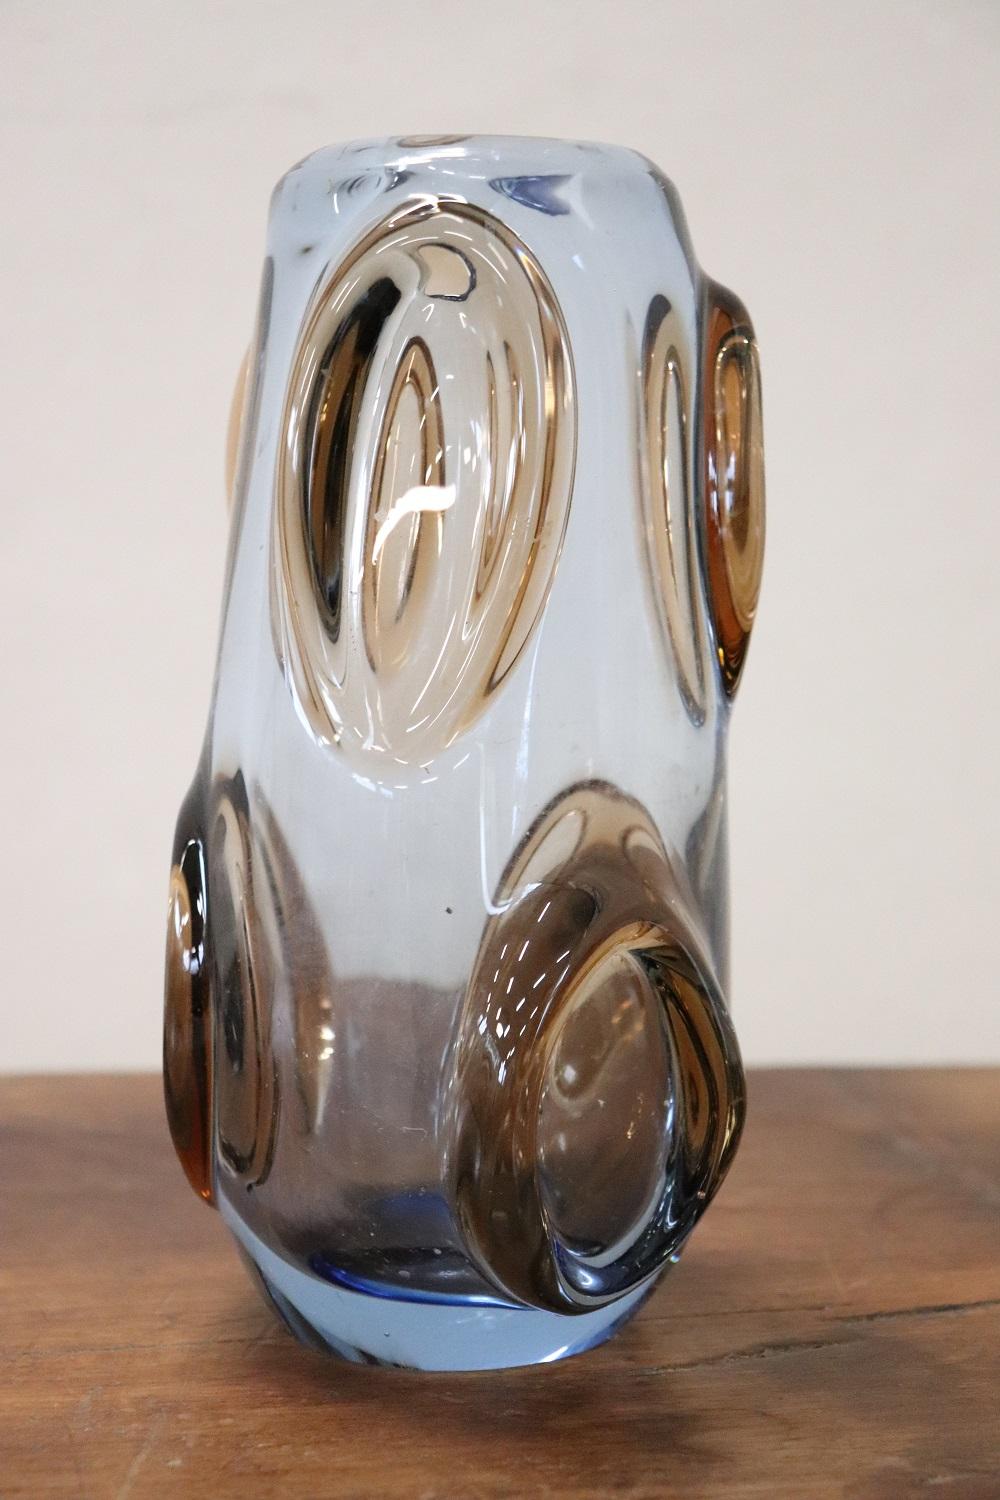 Refined artistic glass vase, Italy, production 1960s Murano. Not signed.